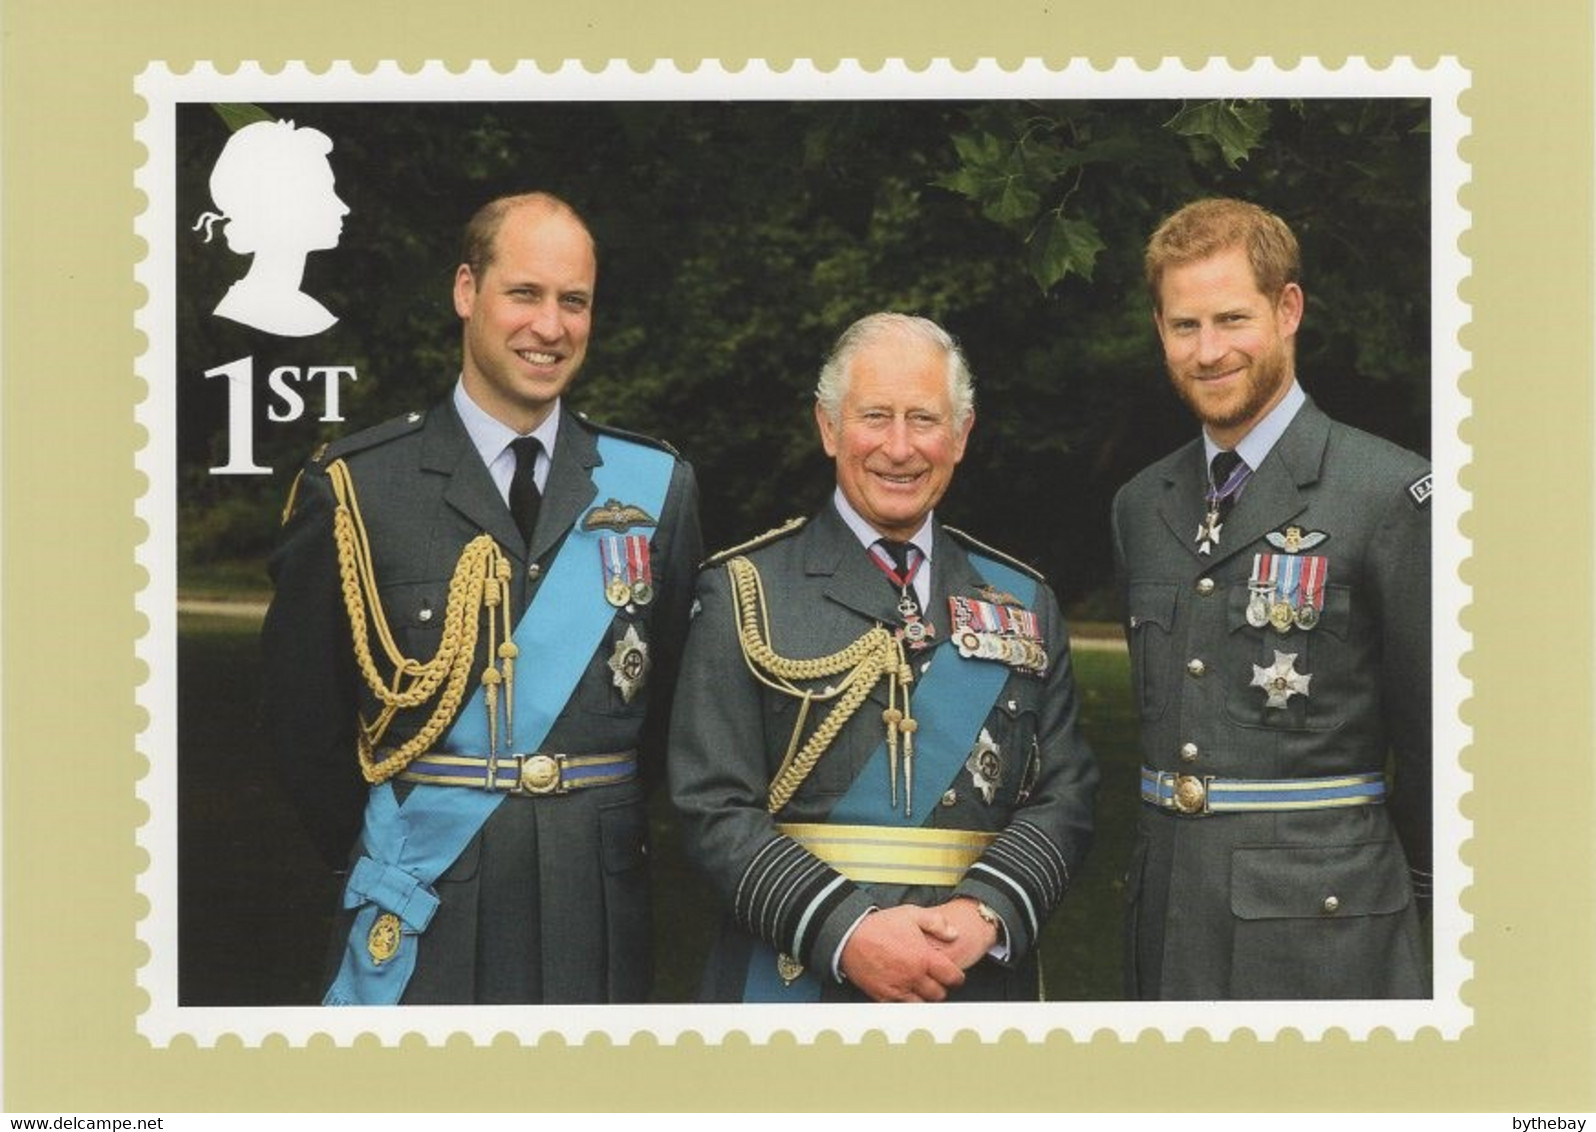 Great Britain 2018 PHQ Card Sc 3801c 1st Princes Charles, William, Harry 70th Birthday - PHQ Cards